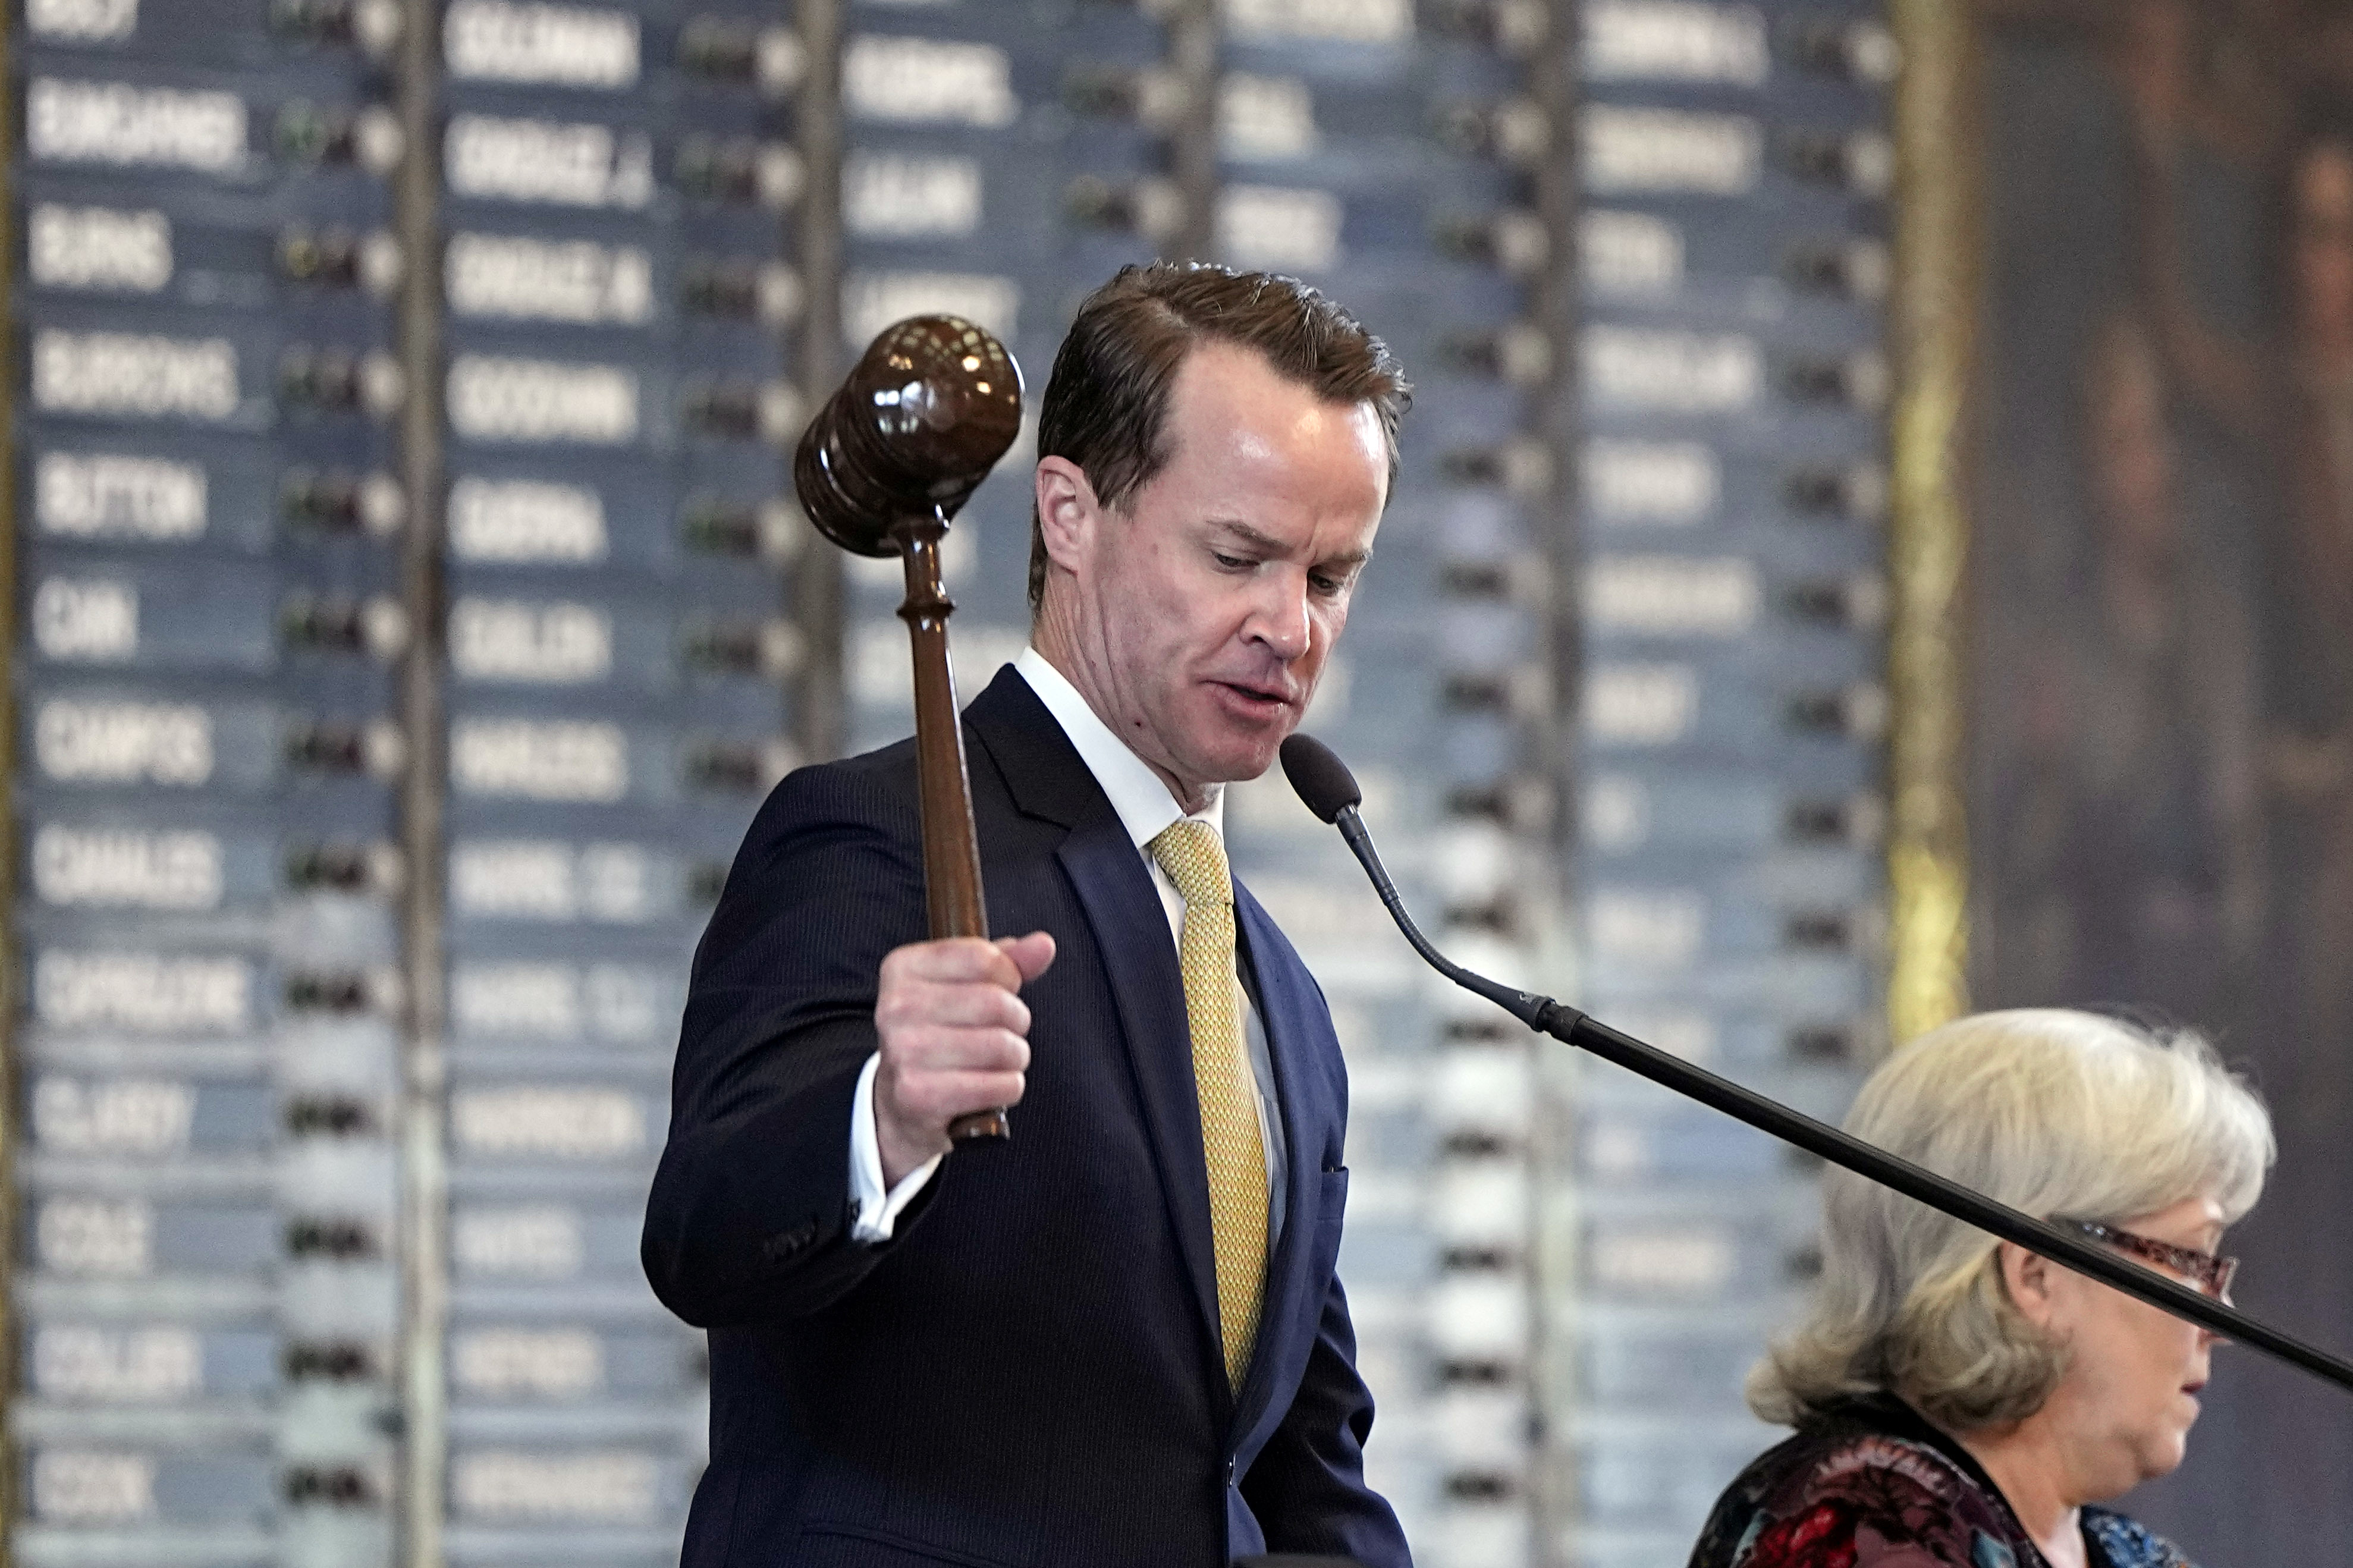 Speaker of the House Dade Phelan strikes the gavel in the House chamber where SB14 is being debated at the Capitol of Texas in Austin, Texas, Friday, May 5, 2023. (AP Photo/Eric Gay)